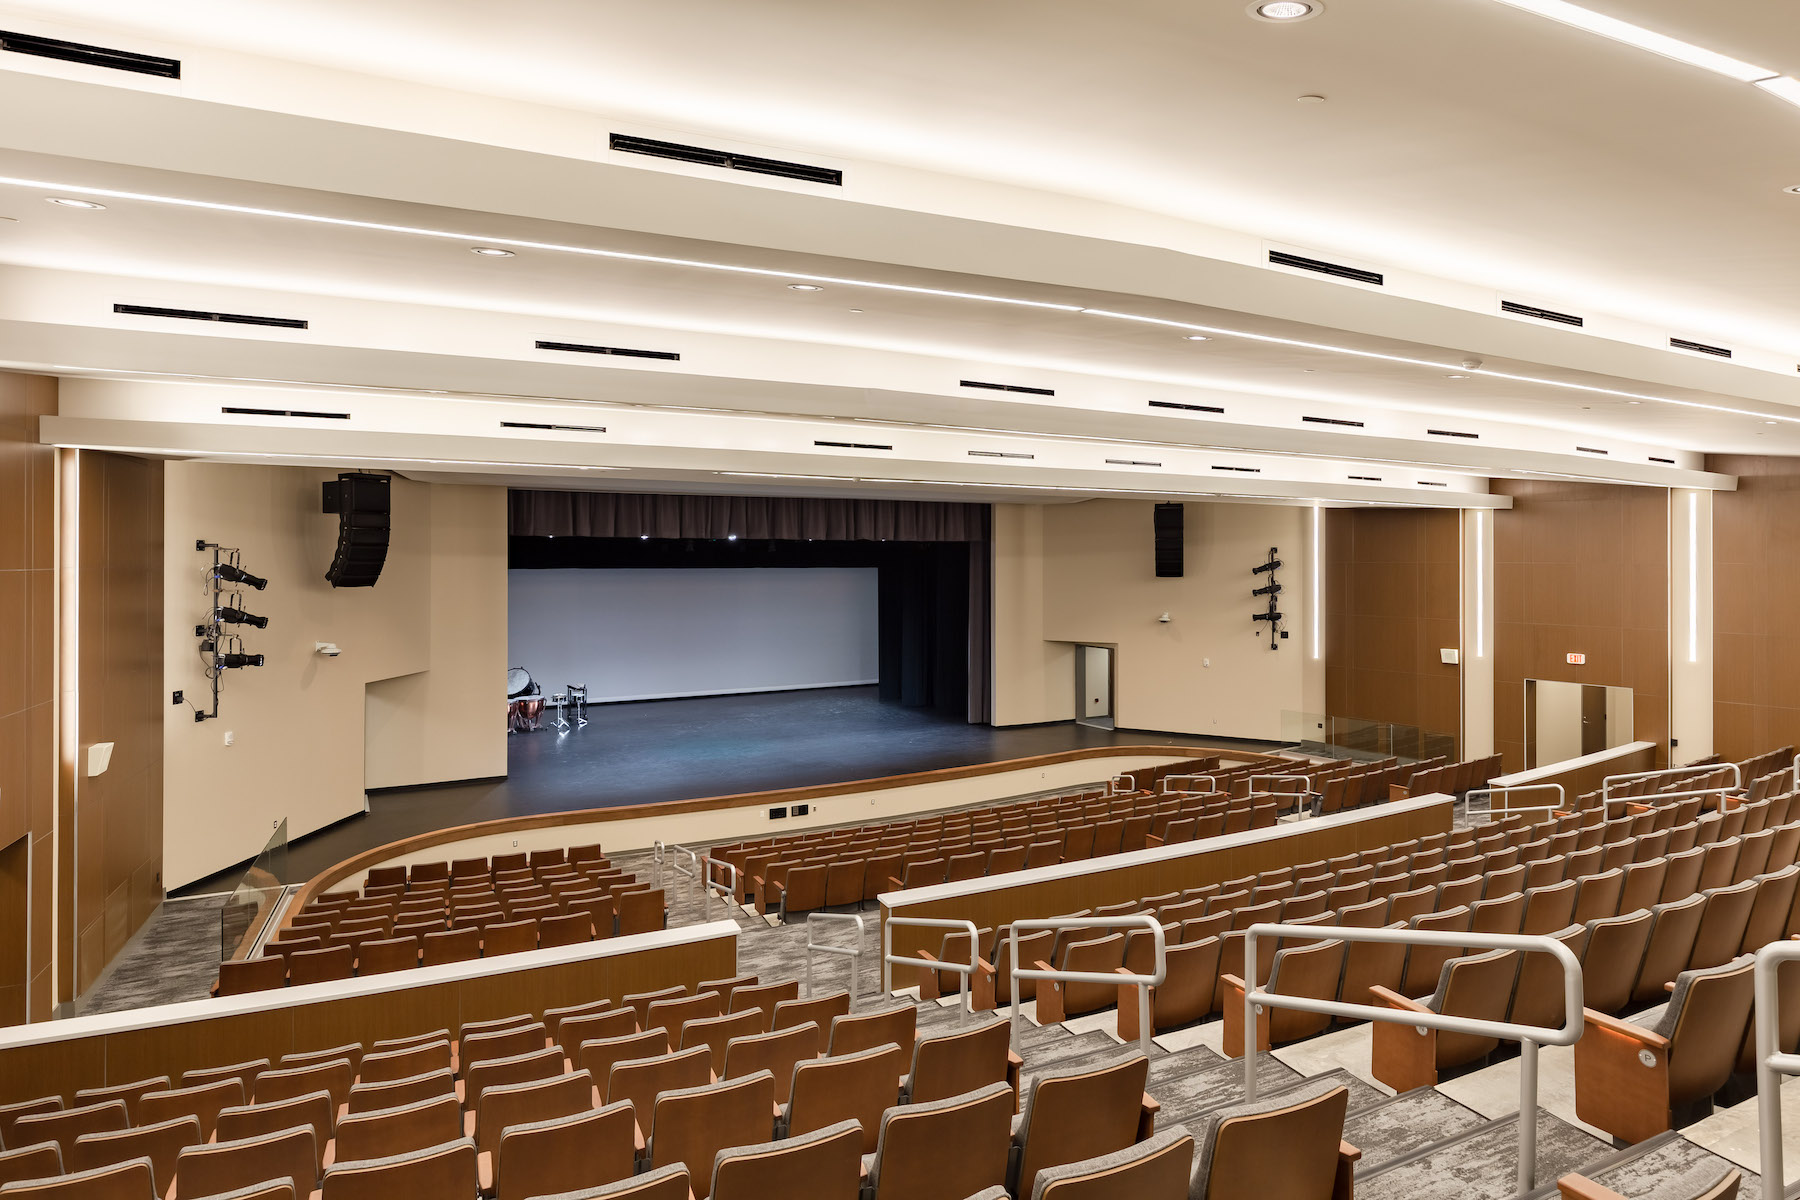 The stage and orchestra of the new Performing Arts Center